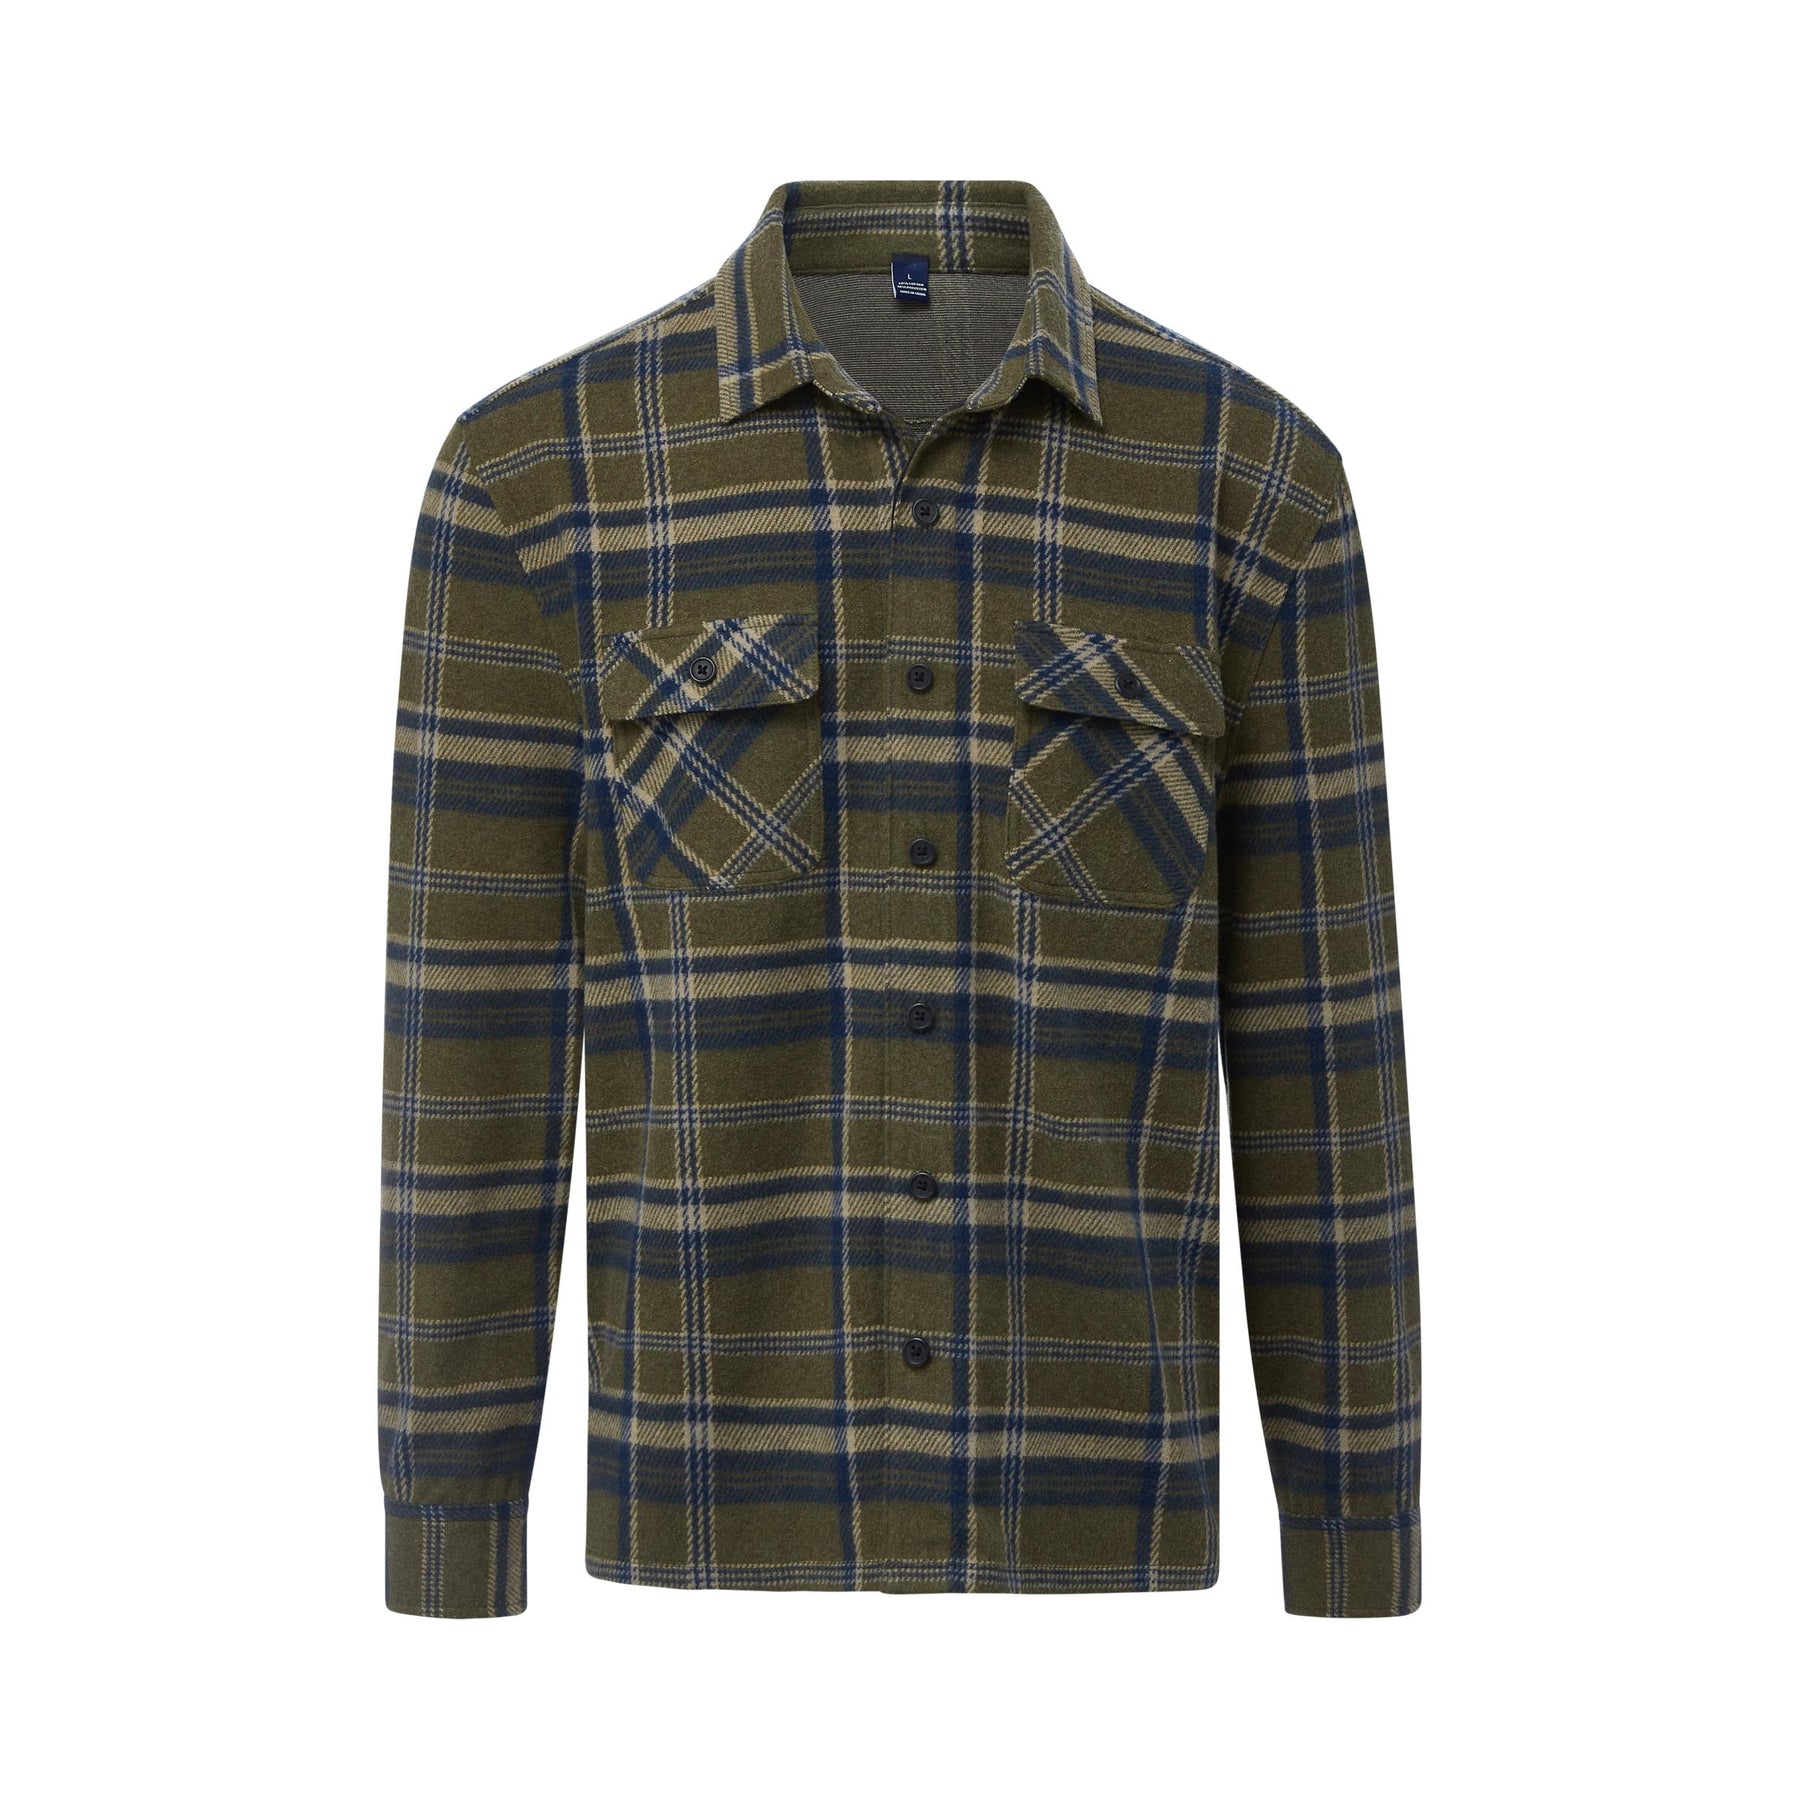 Long Sleeve Olive Plaid Flannel Shirt Combo Layering Piece with Magnet